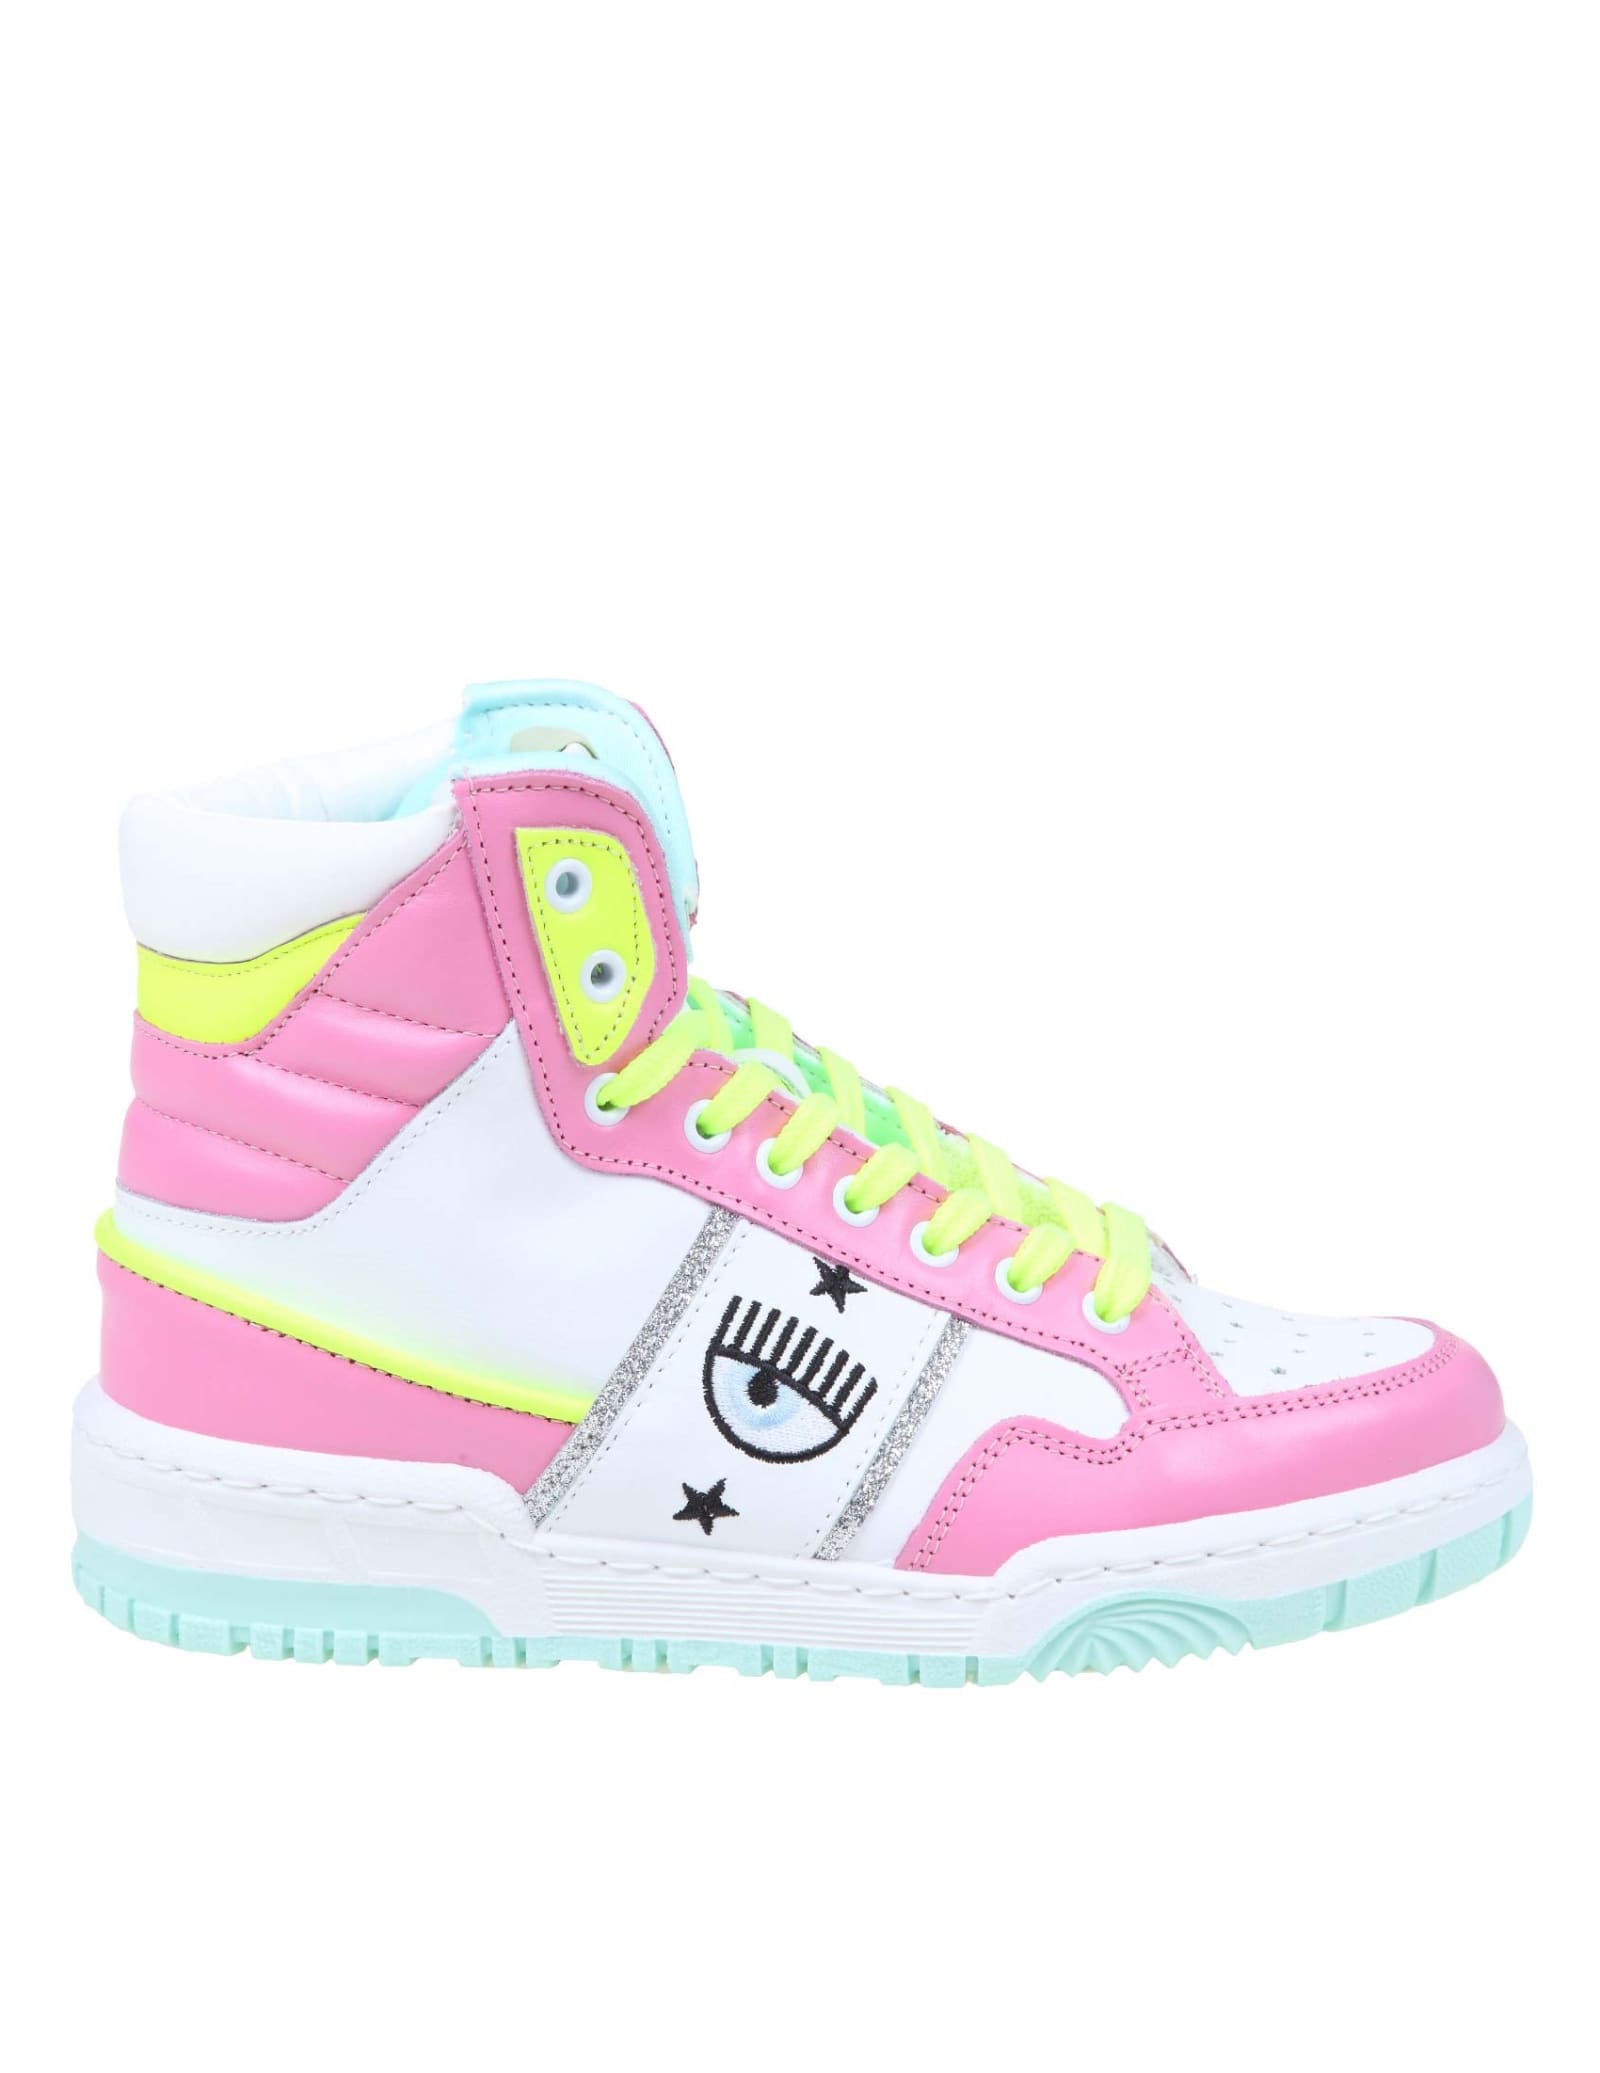 Chiara Ferragni High Sneakers Cf-1 In White And Pink Leather